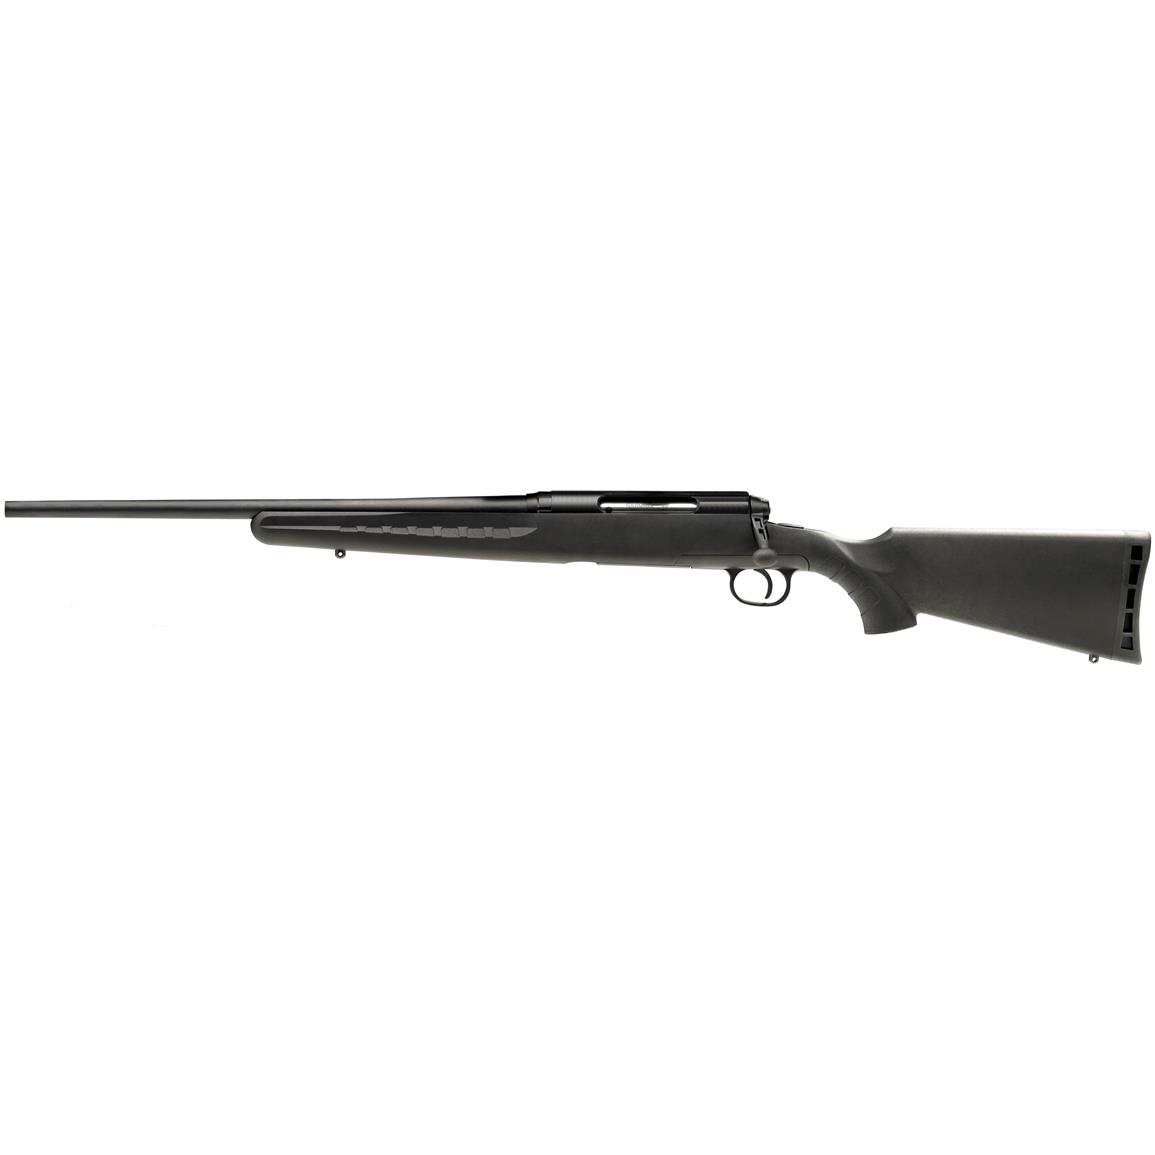 Savage Axis Series, Bolt Action, 7mm-08 Remington, 22" Barrel, 4 1 Rounds, Left Handed